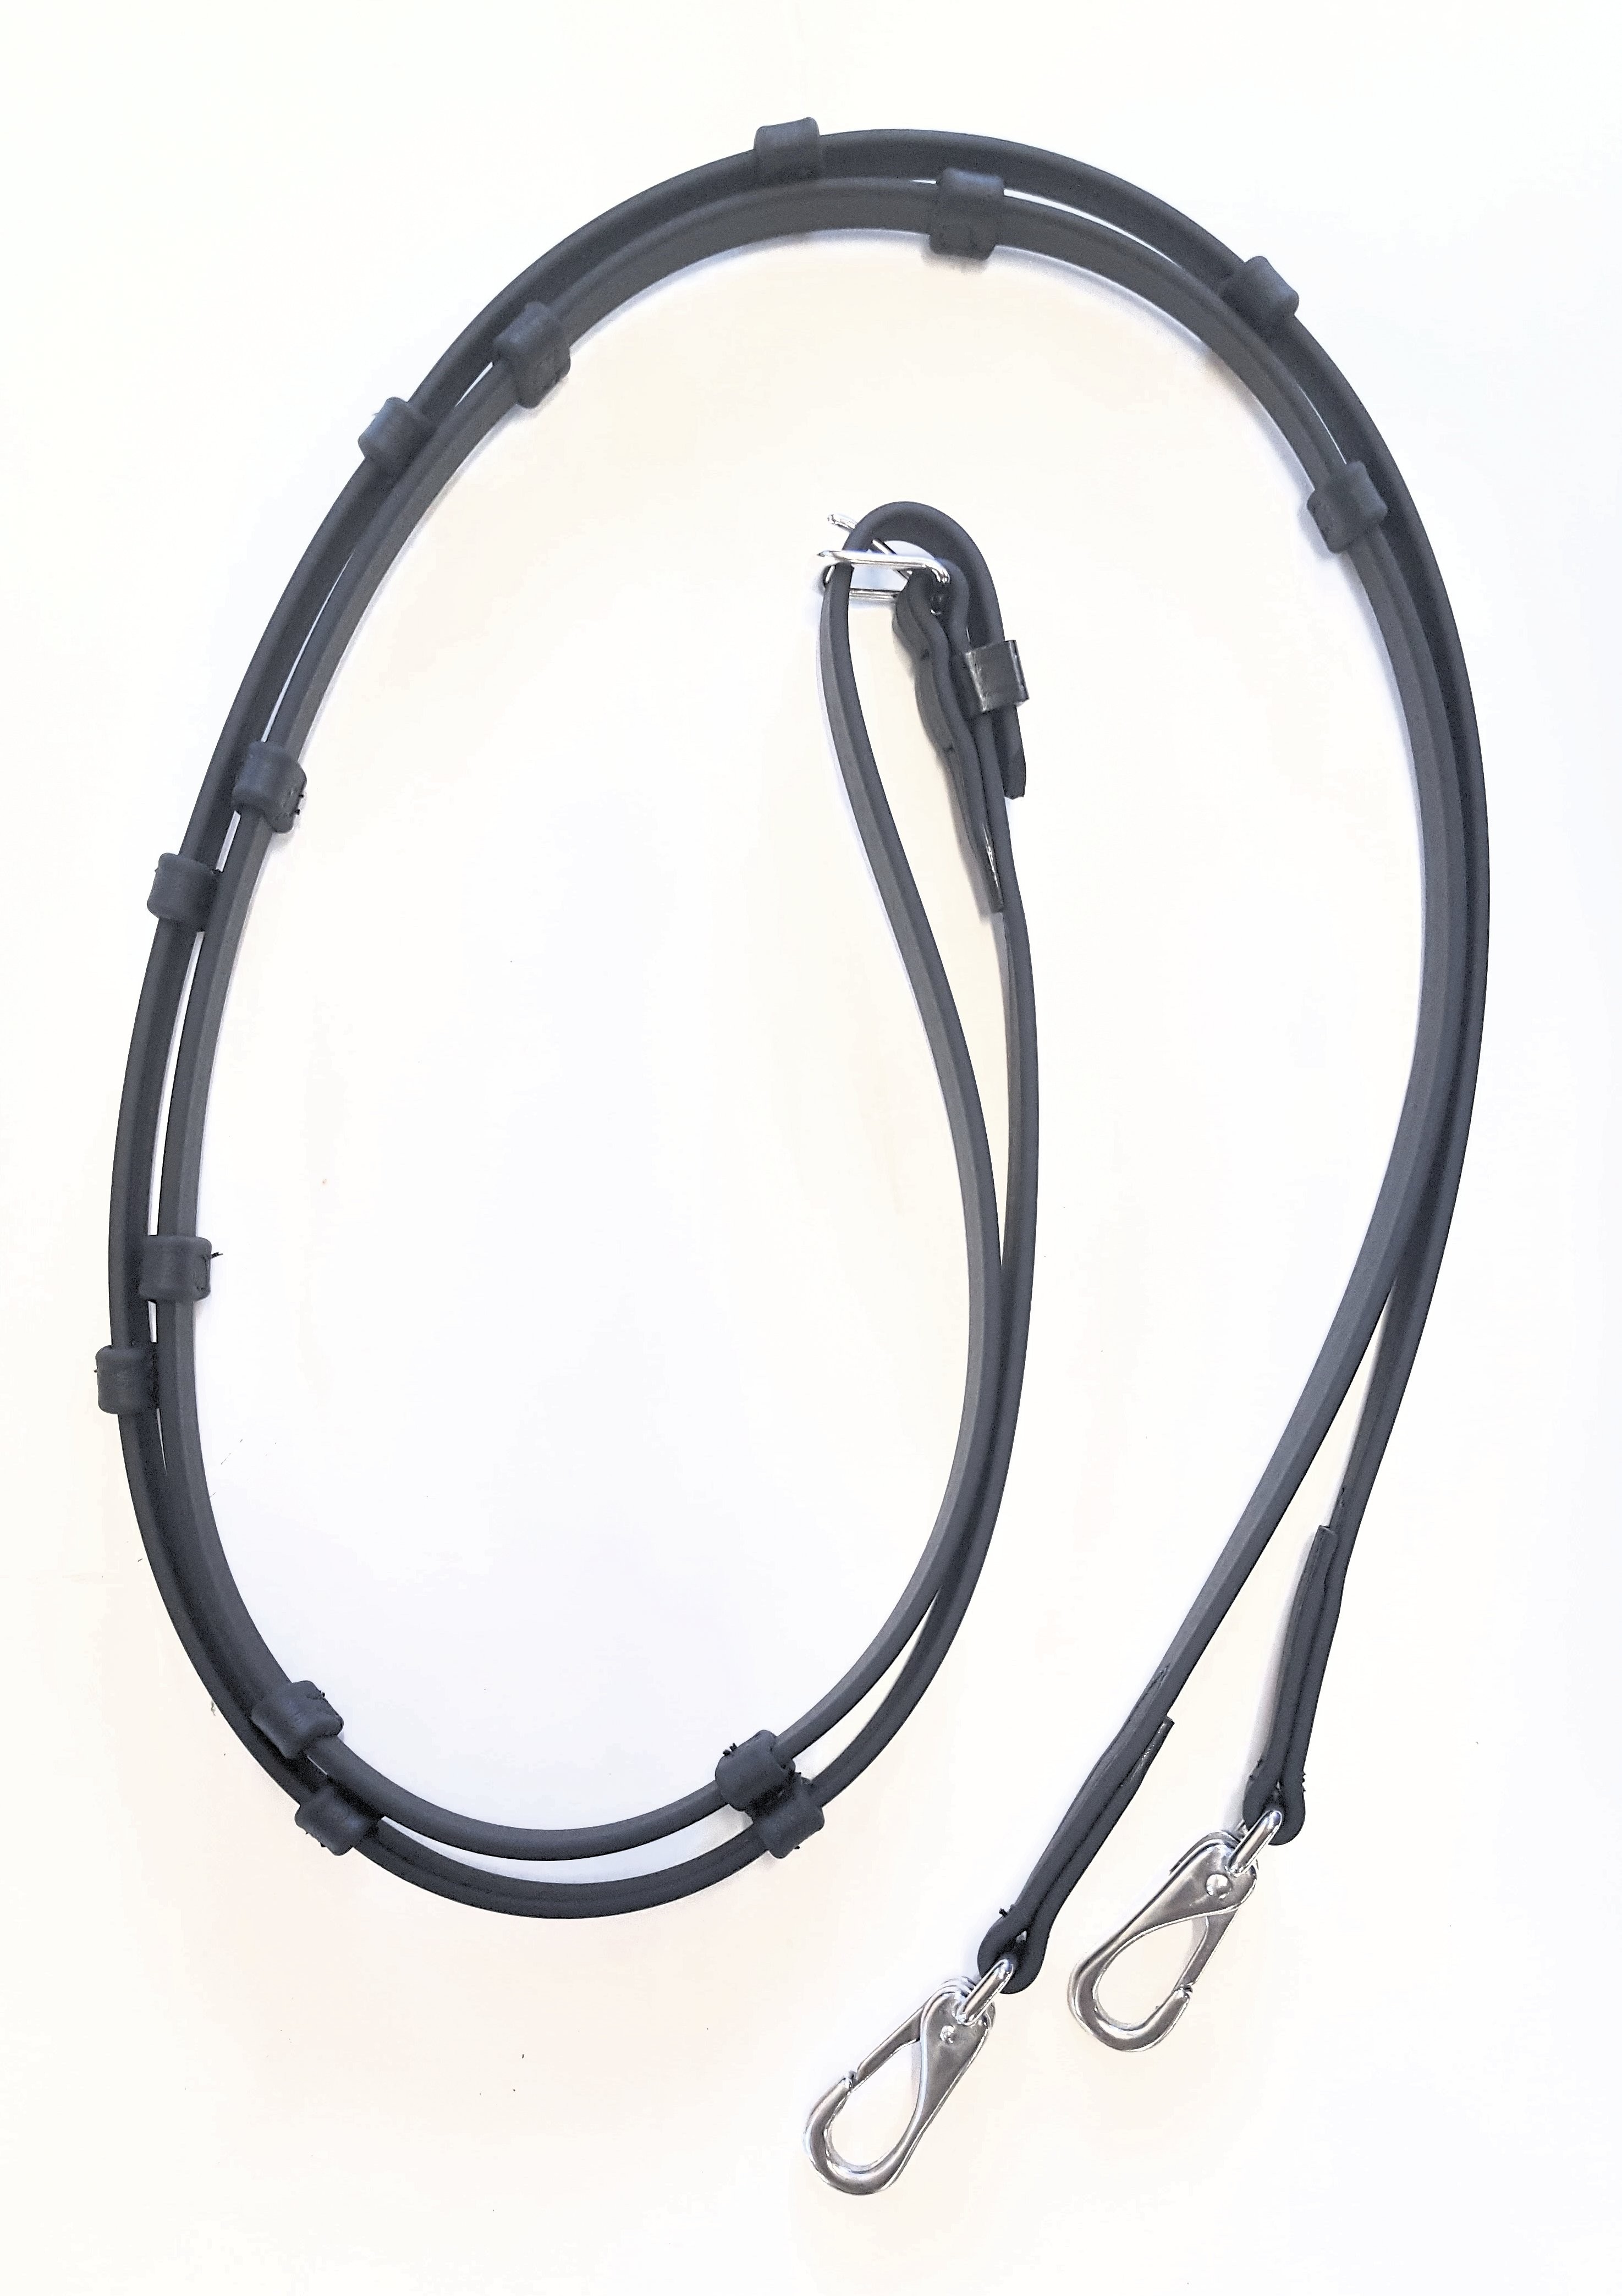 Beta Smooth English Reins with Knobs.  With Buckles or Snaps